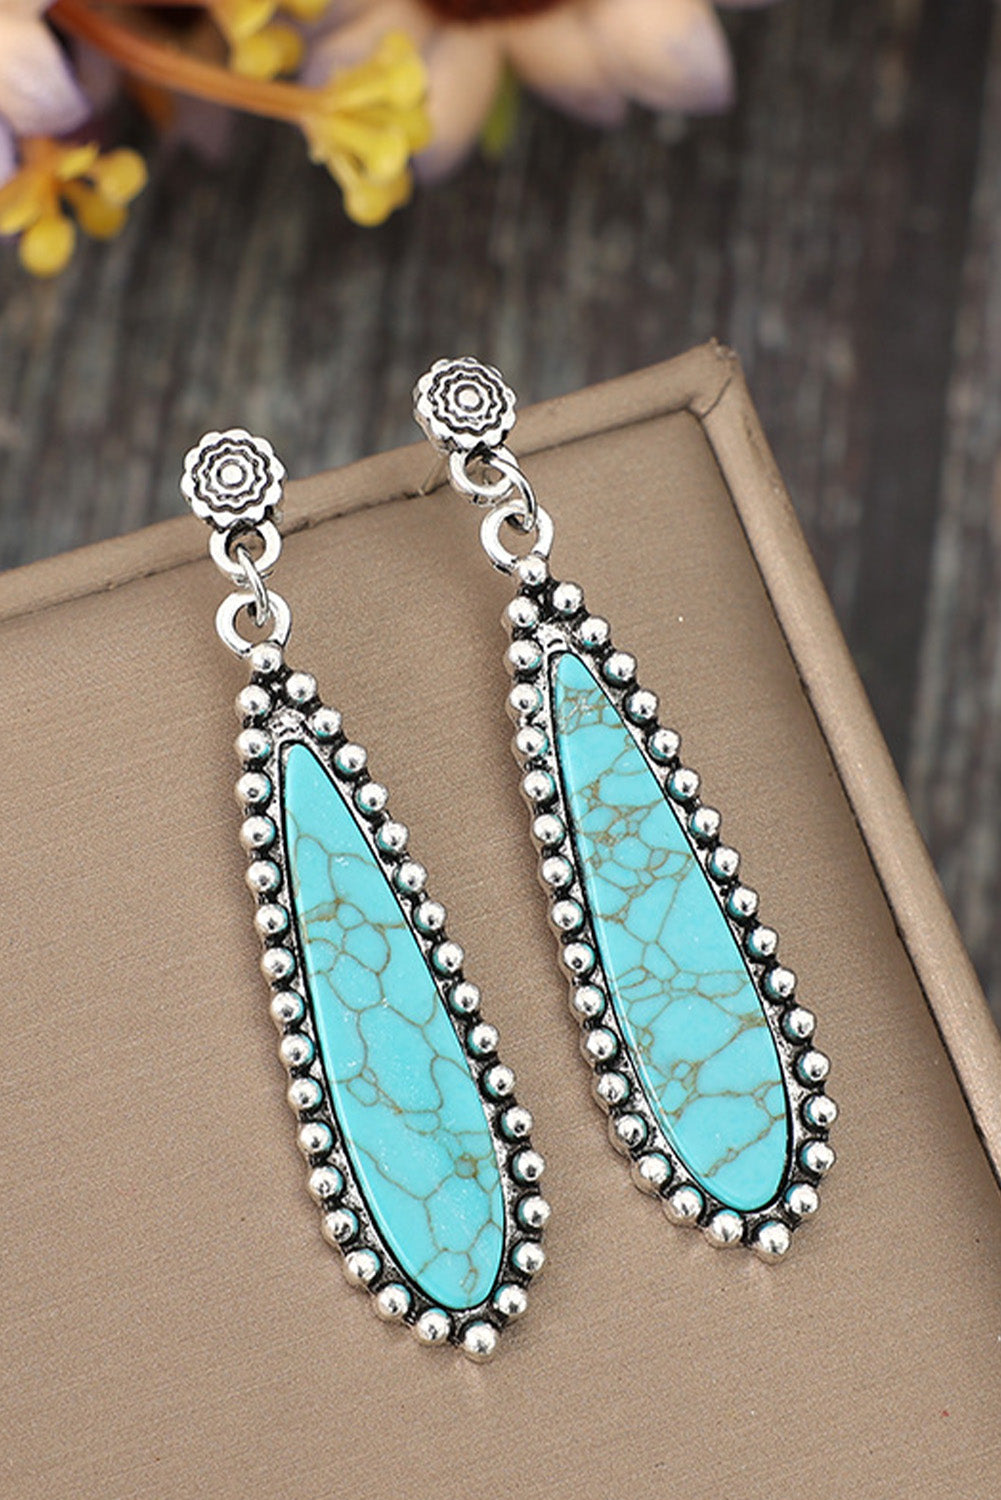 Silvery Vintage Bohemian Turquoise Alloy Earrings Jewelry JT's Designer Fashion